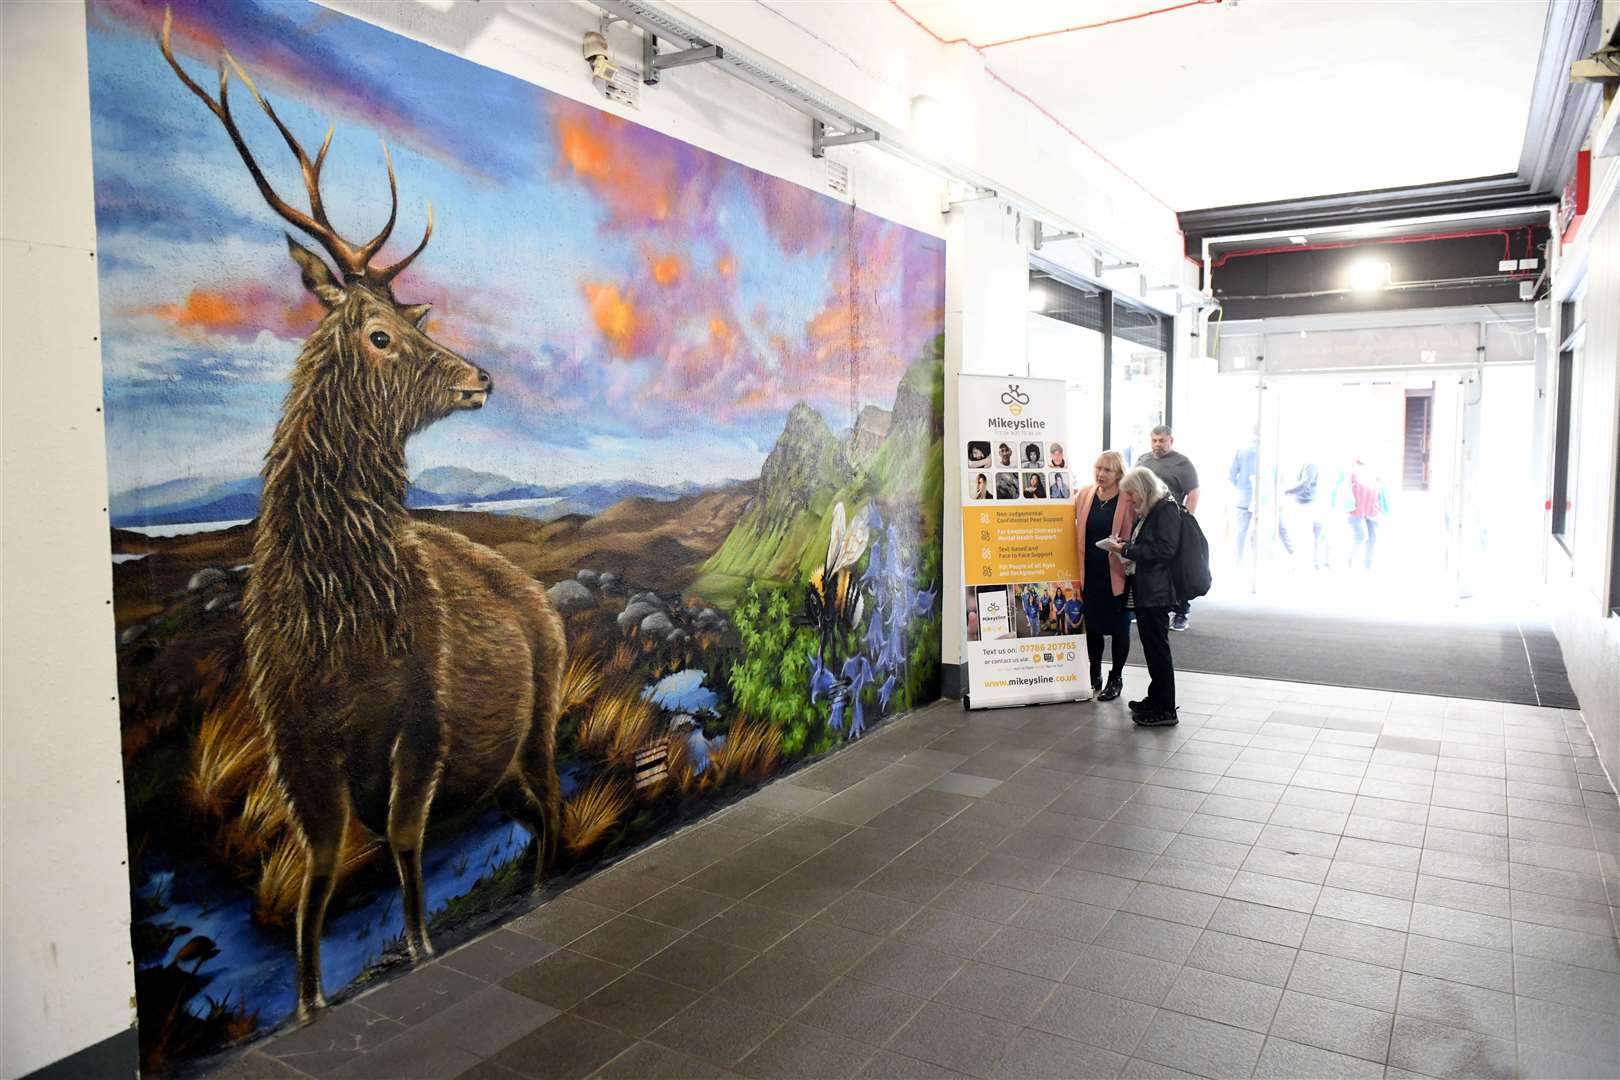 The new mural has brightened up the market's Union Street entrance. Picture: James Mackenzie.